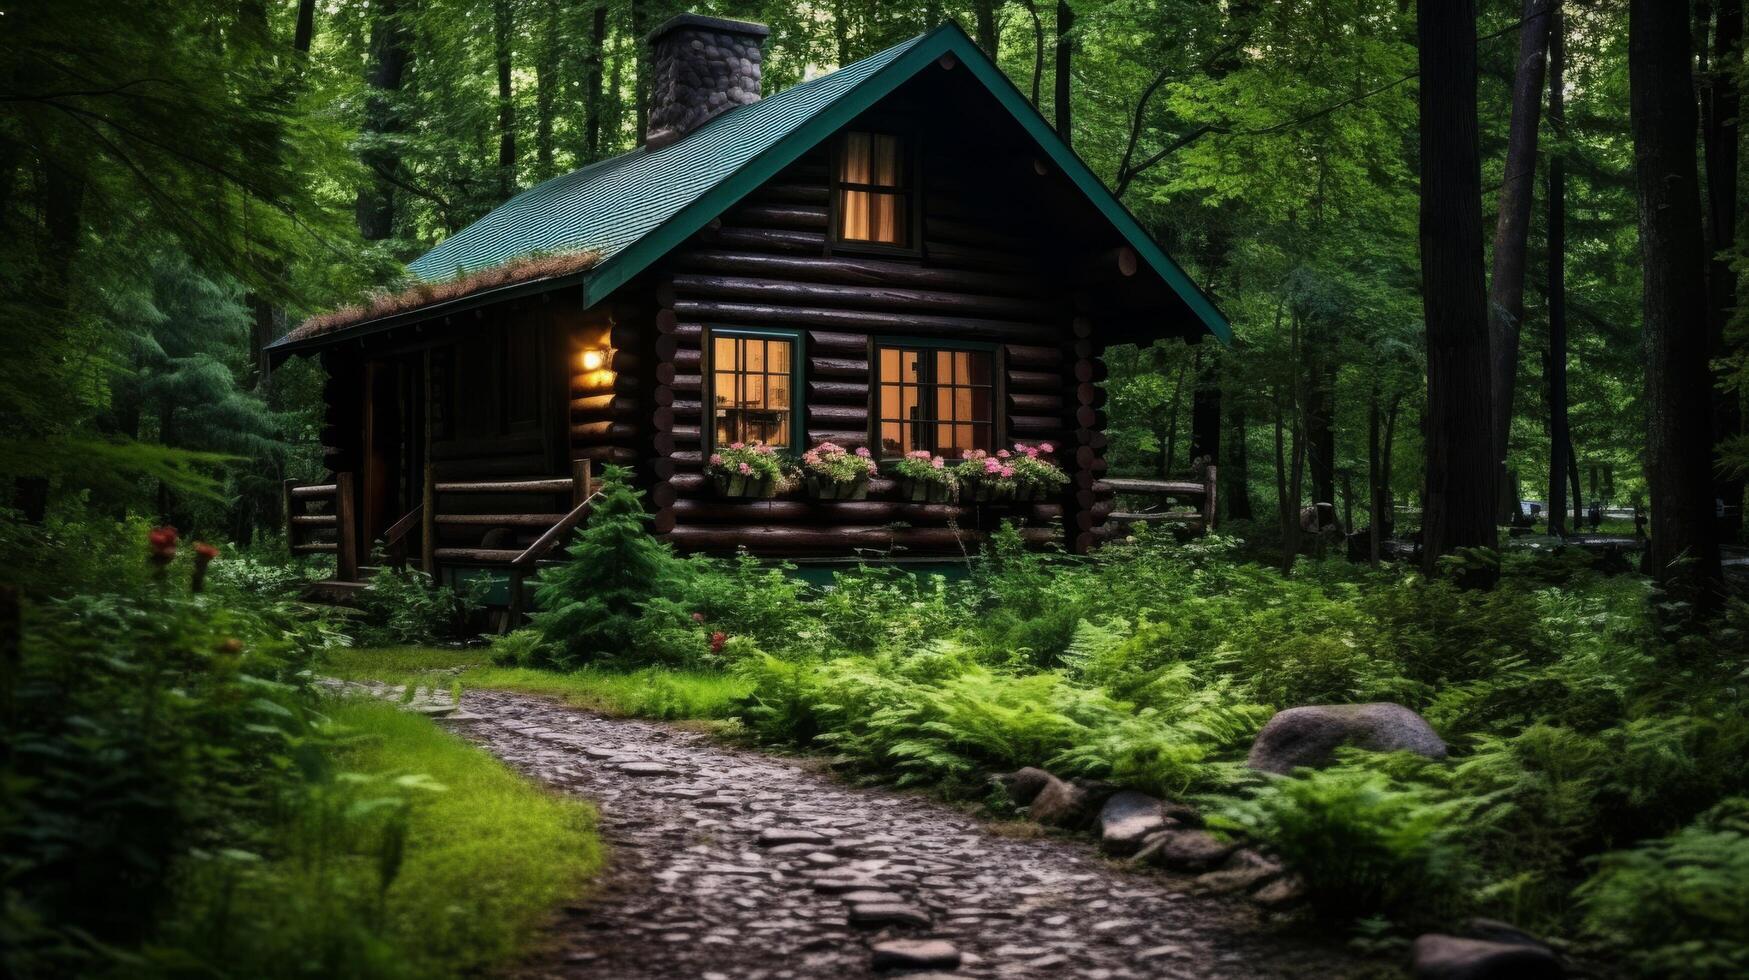 Rustic shack secluded woodland photo